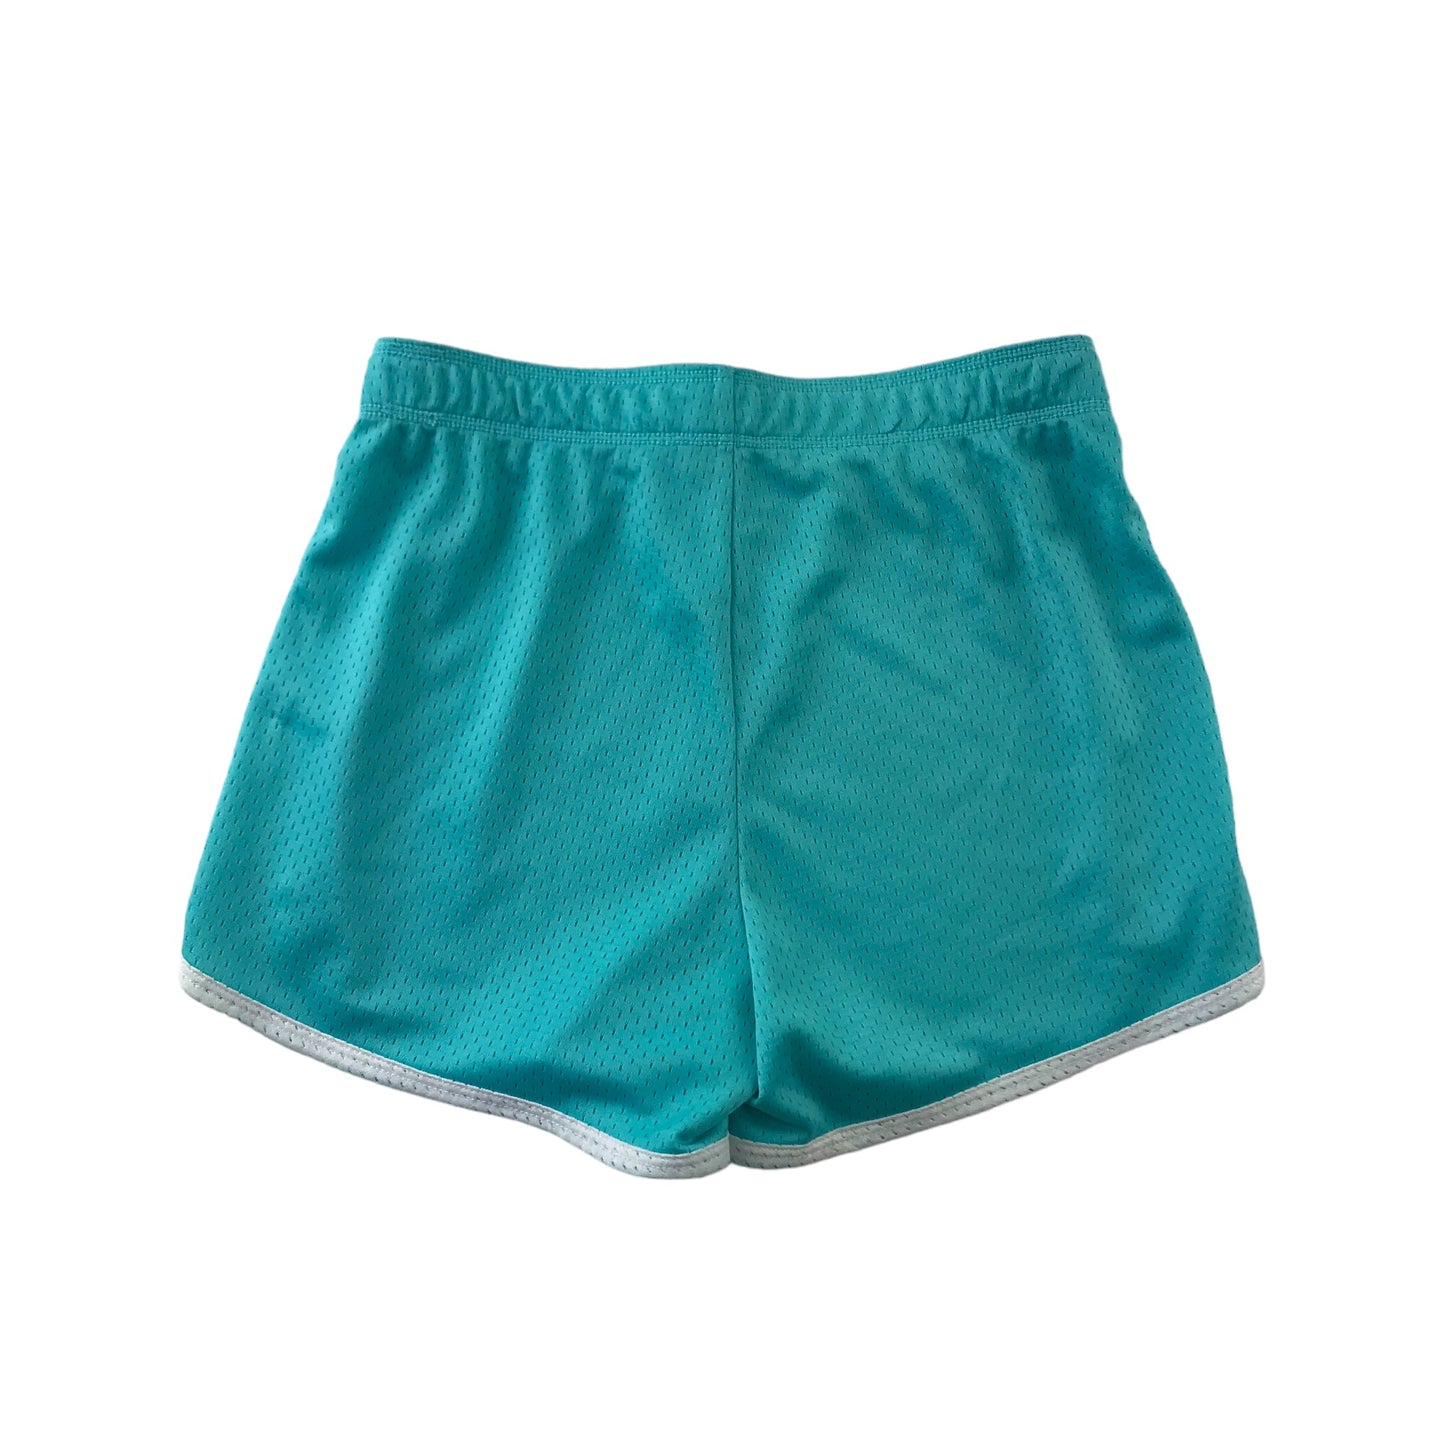 Justice Active Sport Shorts Age 12 Light Blue with White Side Stripes